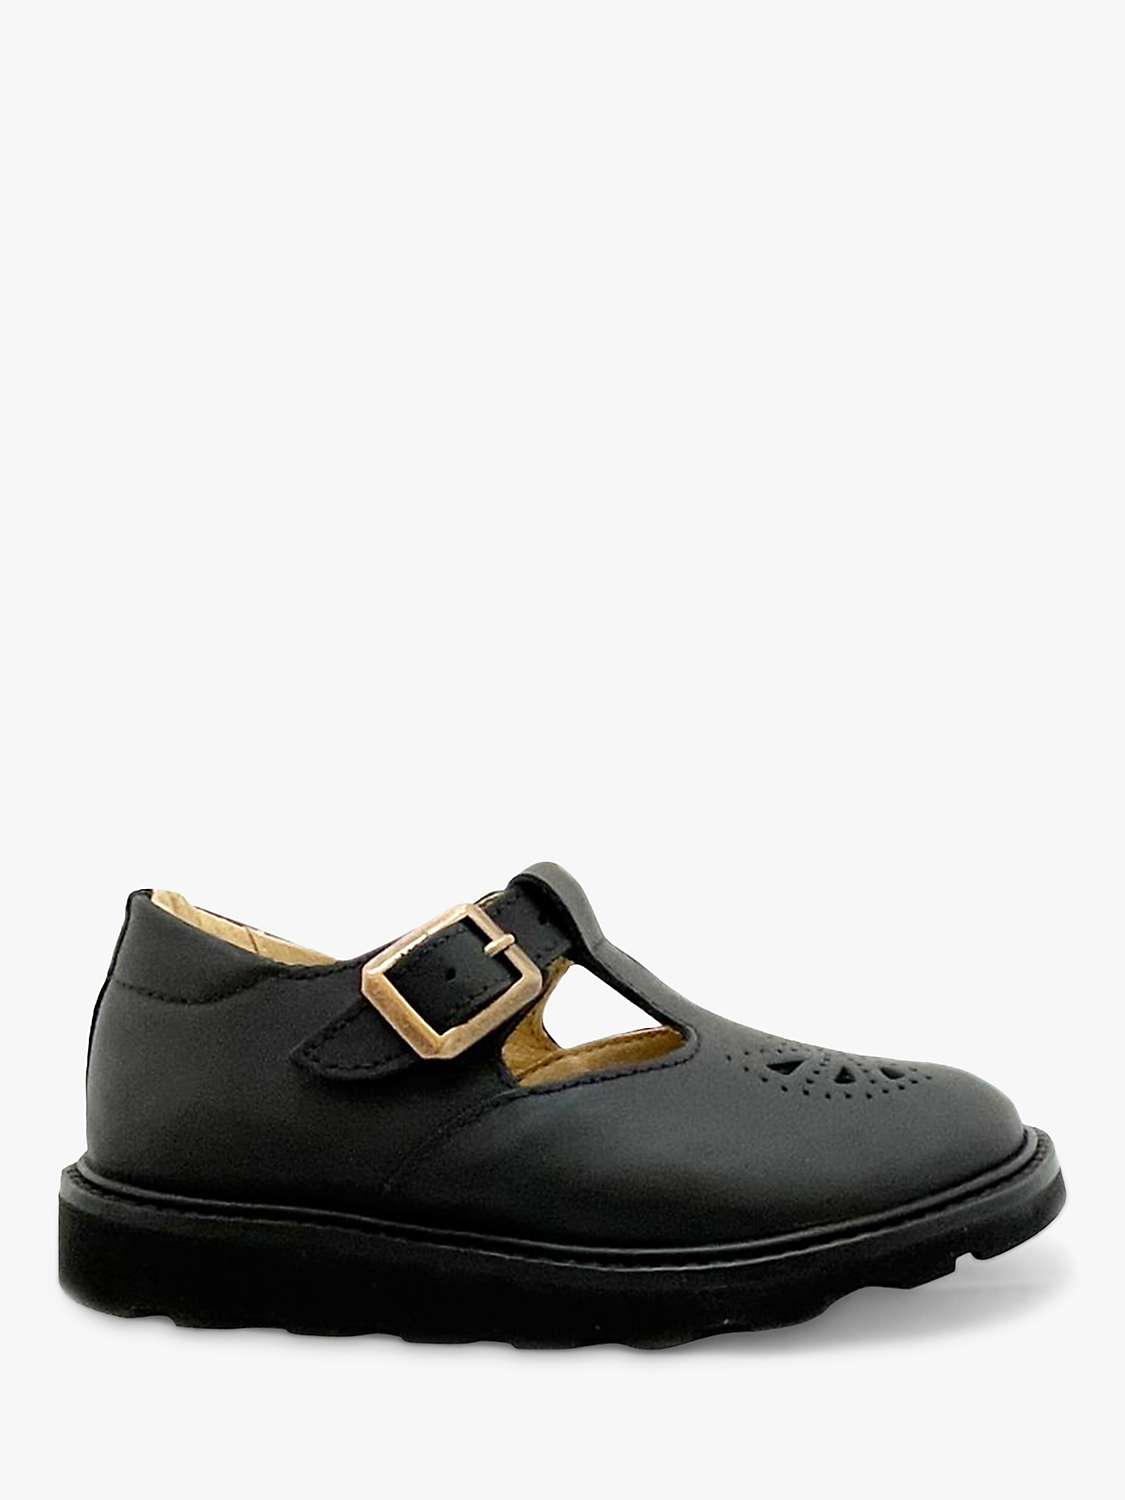 Buy Young Soles Kids' Rosie T-Bar Leather Shoes Online at johnlewis.com